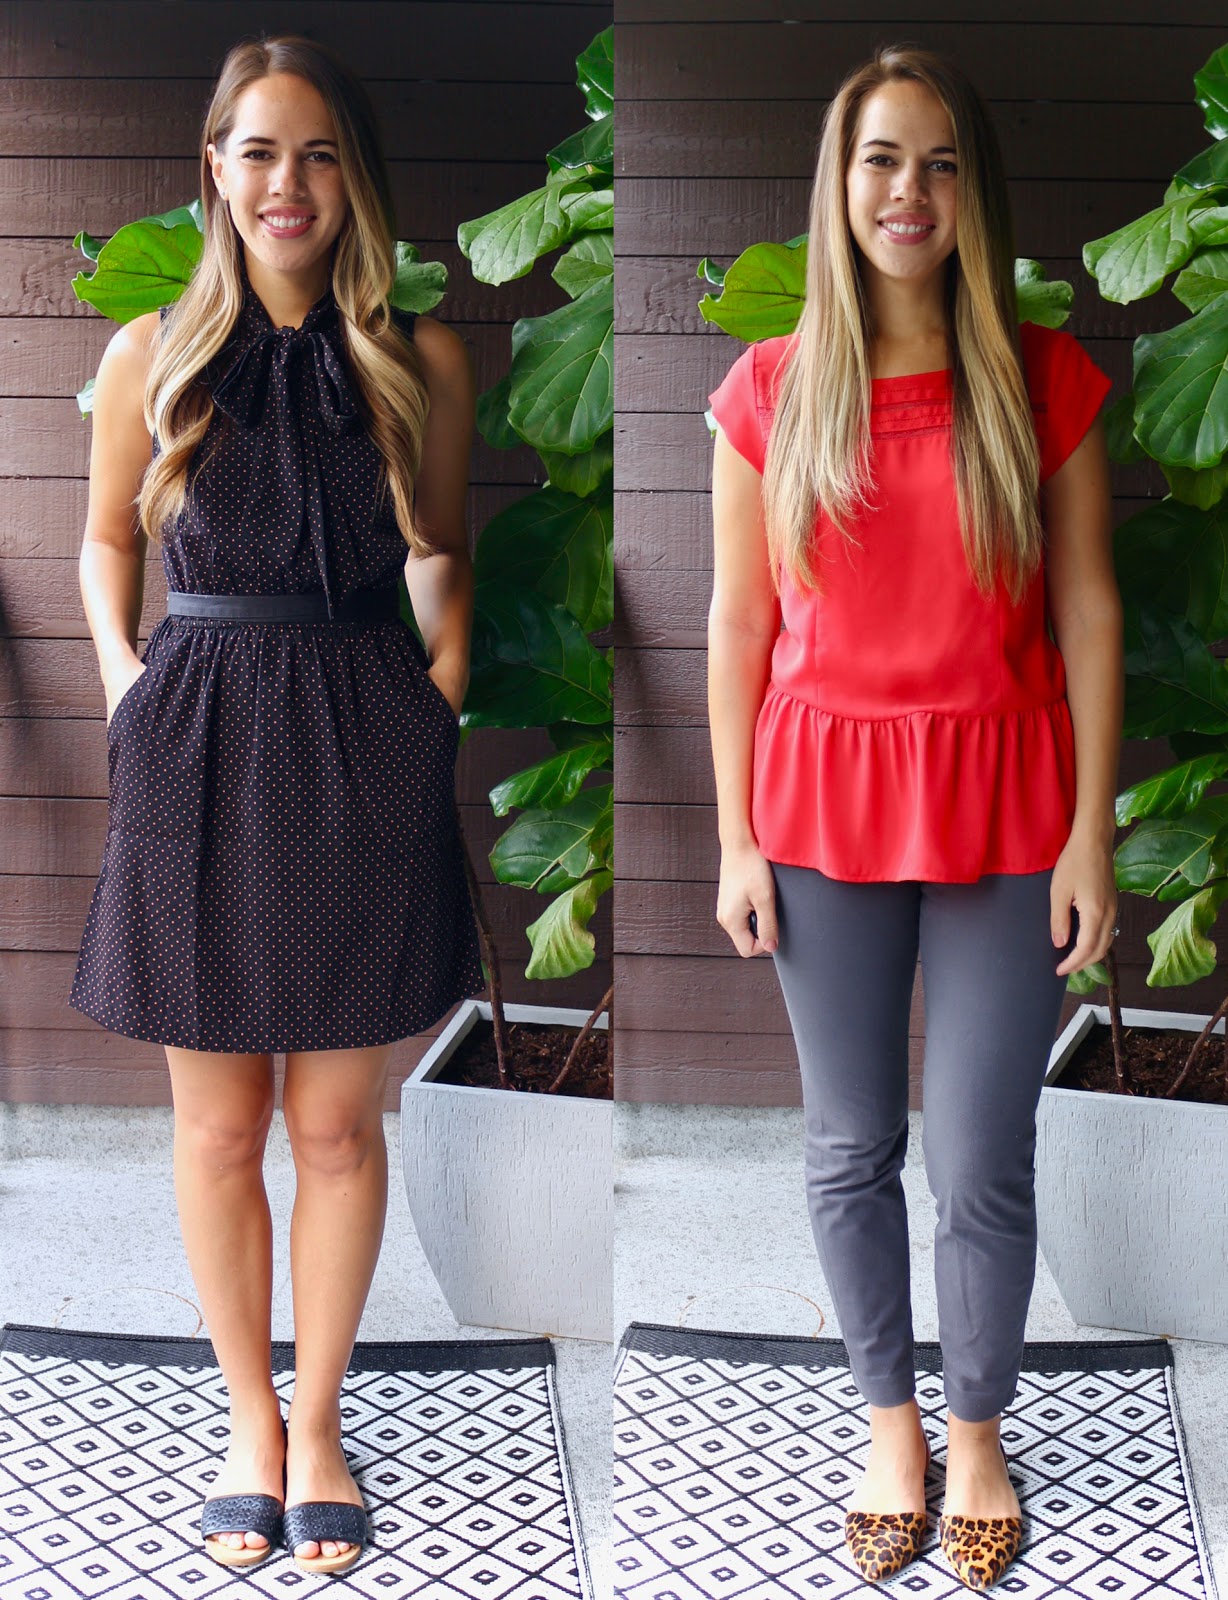 Jules in Flats - August Outfits - Summer Casual Workwear on a Budget